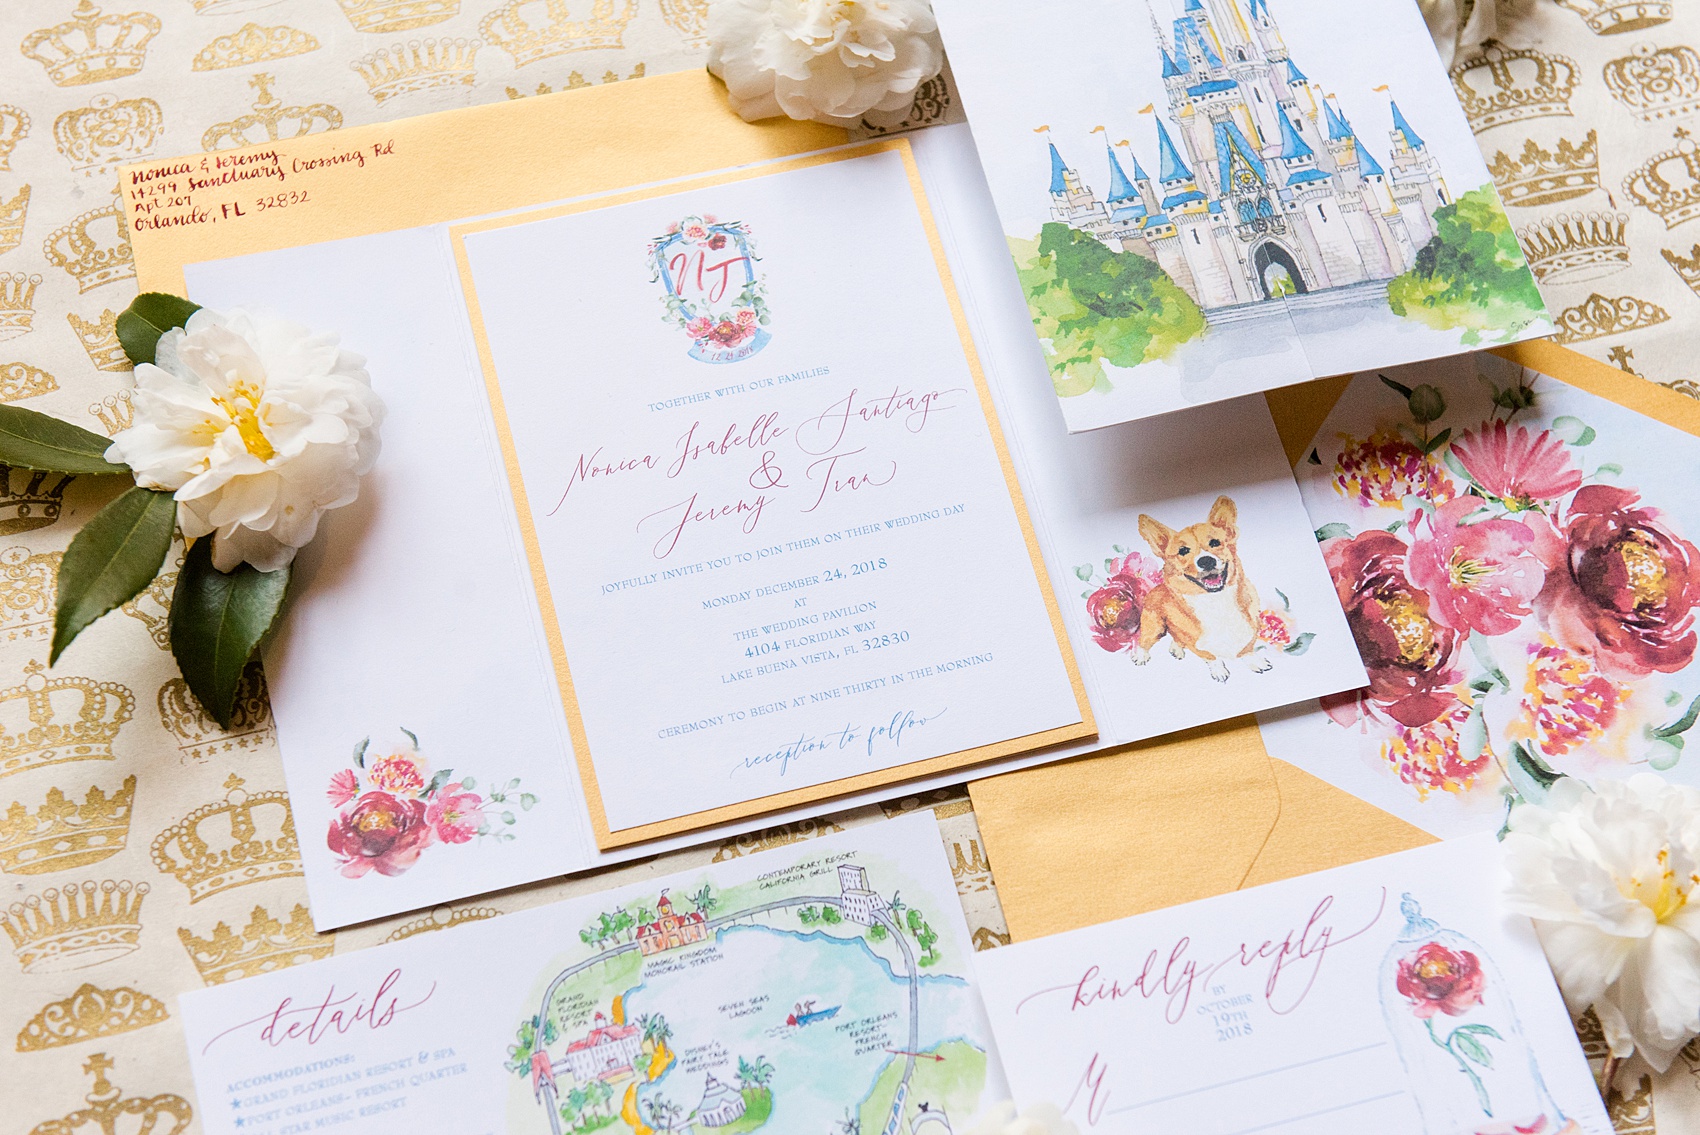 Photographs of a Walt Disney World wedding by Mikkel Paige Photography will give you ideas for a tasteful Beauty and the Beast theme. The awesome invitation had a custom watercolor by Watercolor Design Studio of the couple’s dog, Cinderella’s castle, and the Seven Seas Lagoon. The bride and groom managed beautiful details for their dream ceremony and reception even on a small budget. #disneywedding #disneybride #waltdisneyworld #DisneyWorldWedding #watercolorinvitation #disneyillustration